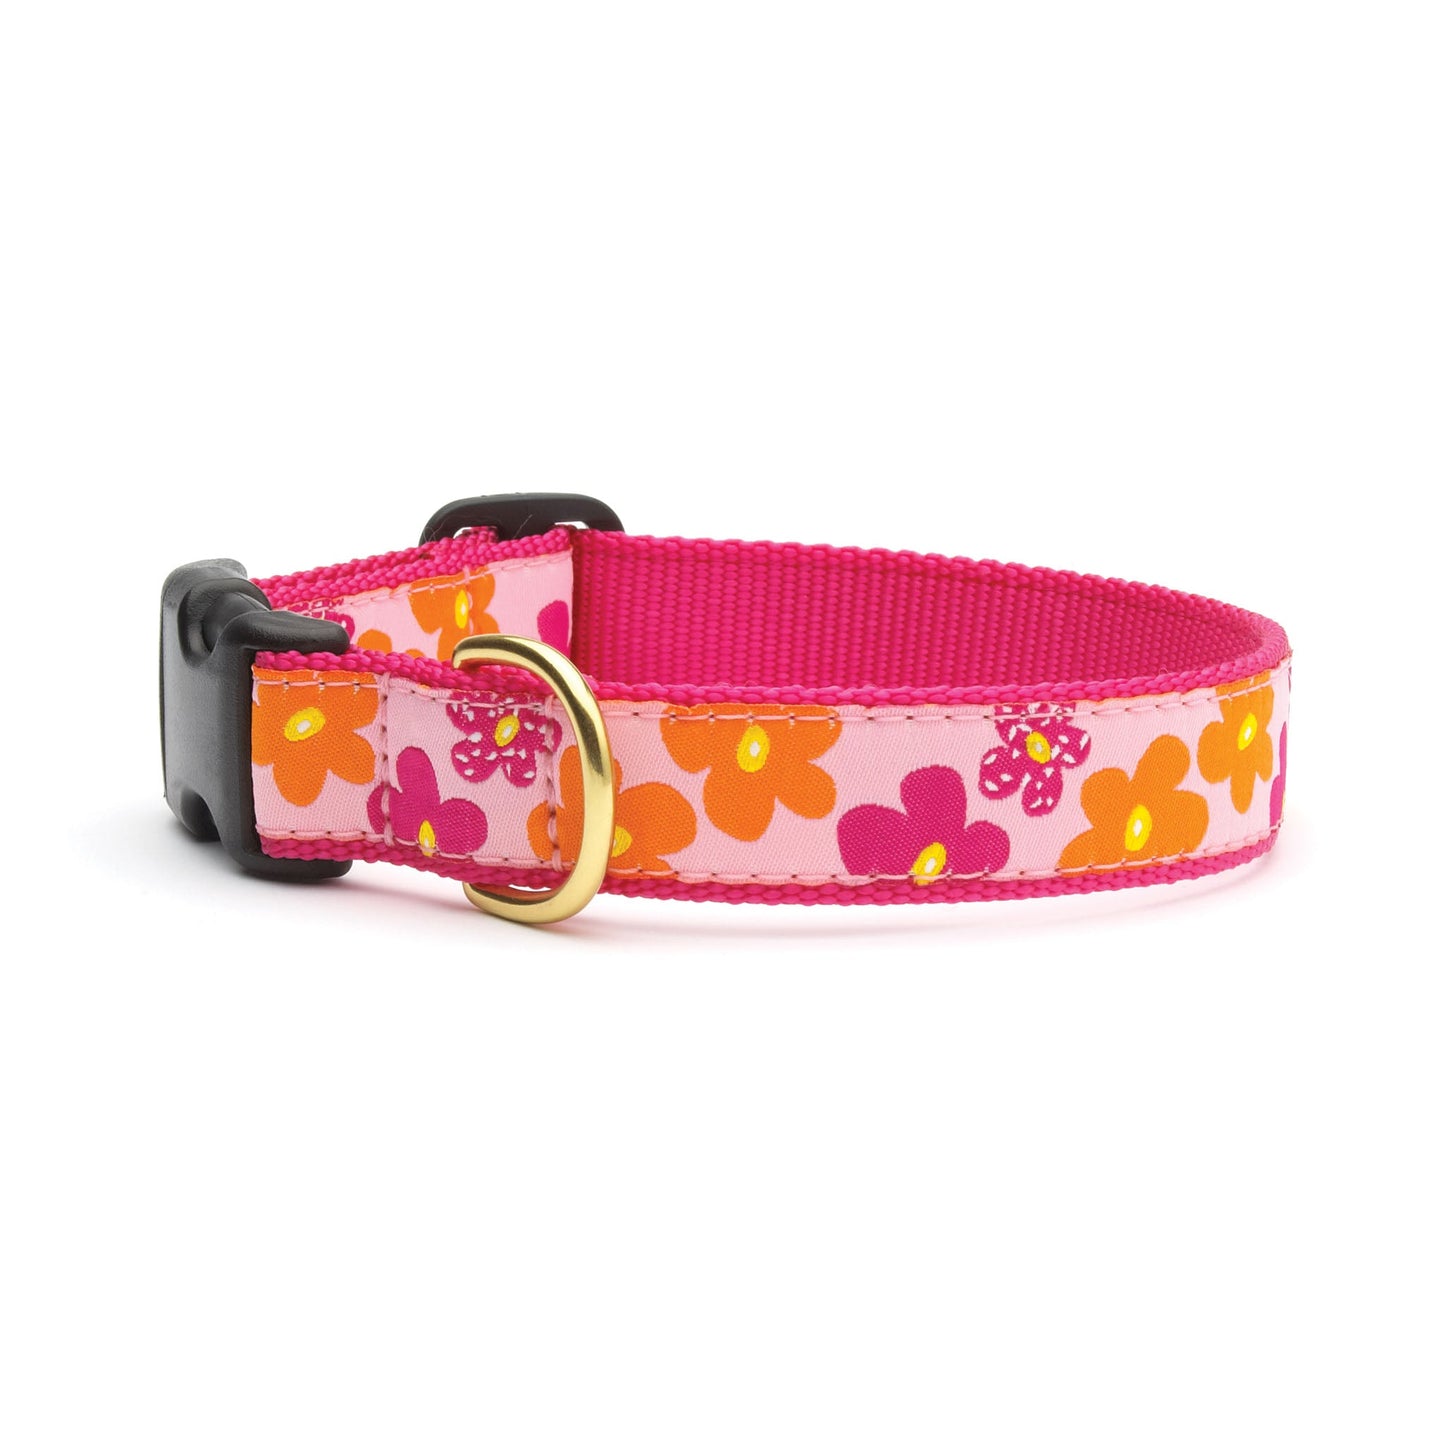 Flower Power Dog Collar by Up Country